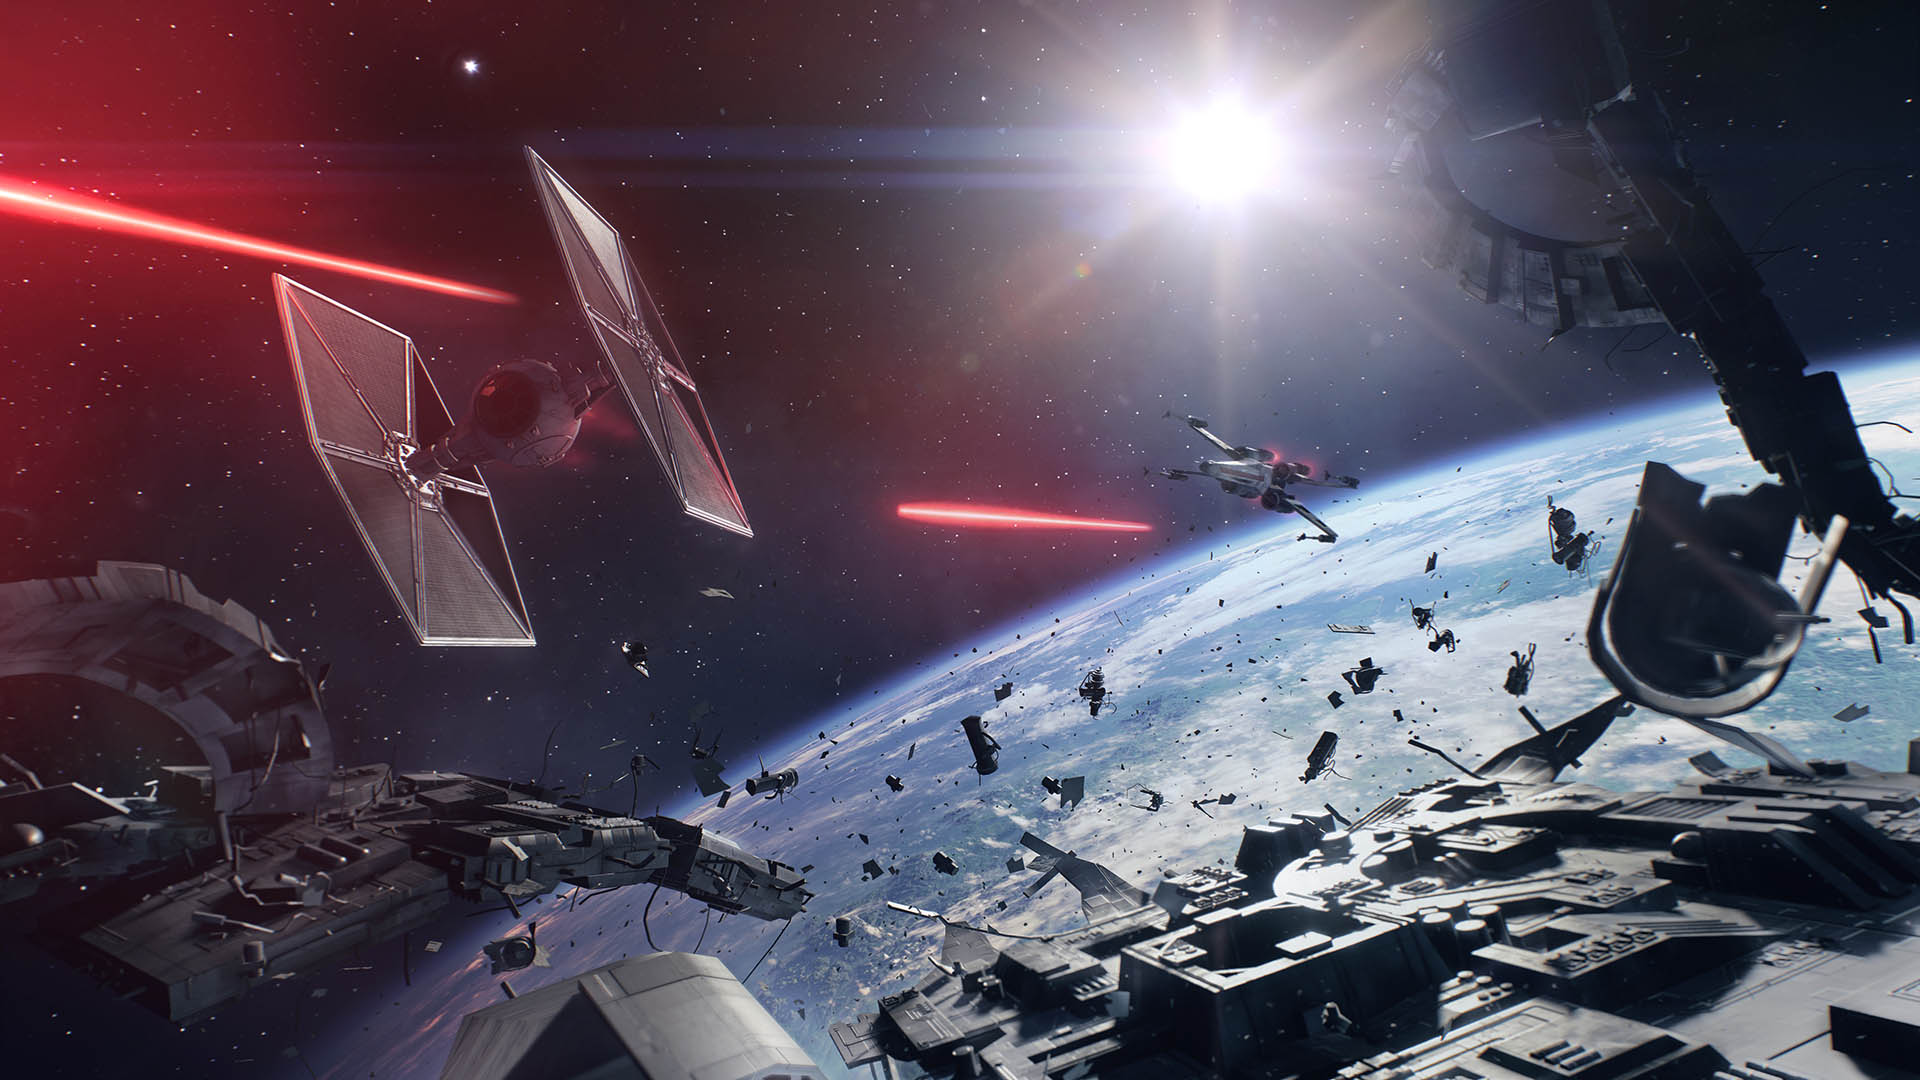 Star Wars Battlefront 2' is free on the Epic Games Store this week